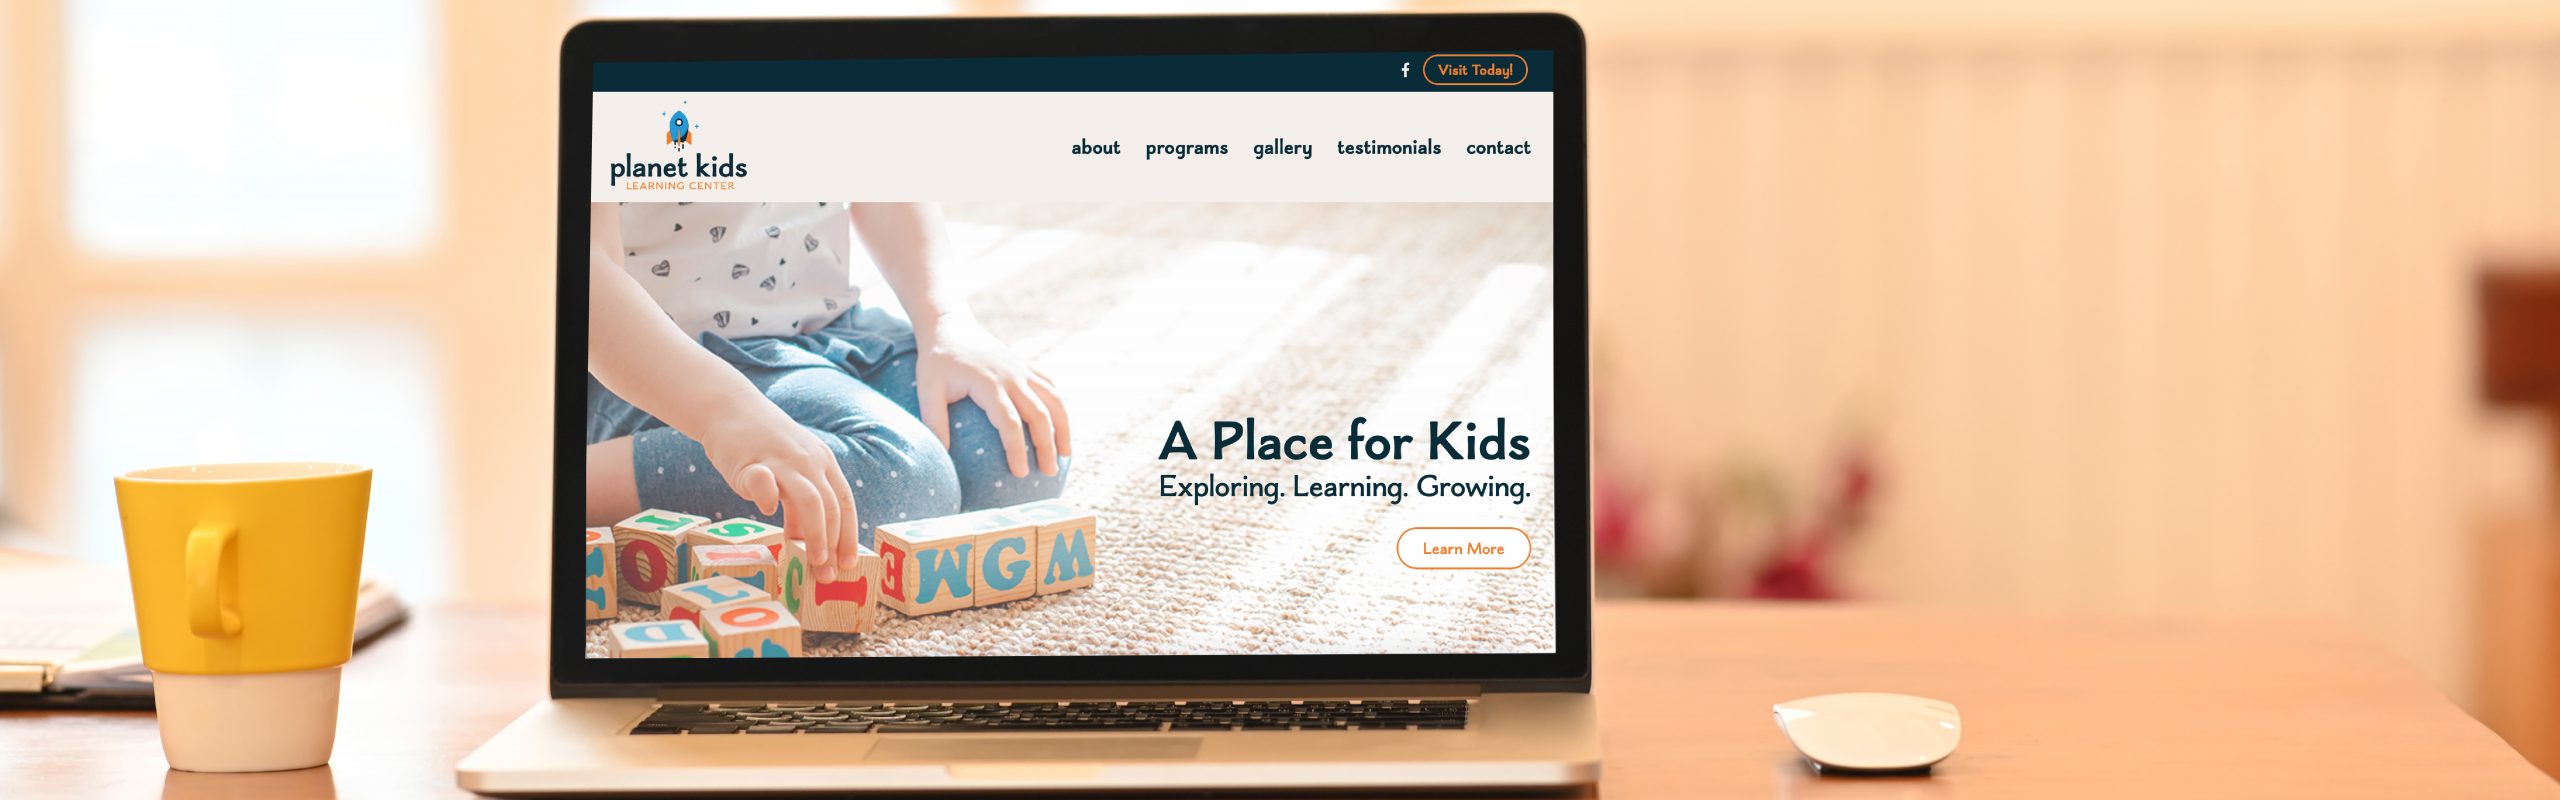 A laptop screen displaying a website called "Planet Kids Learning Center" with a banner that reads "a place for kids - exploring, learning, growing," showing an image of a child playing with building blocks